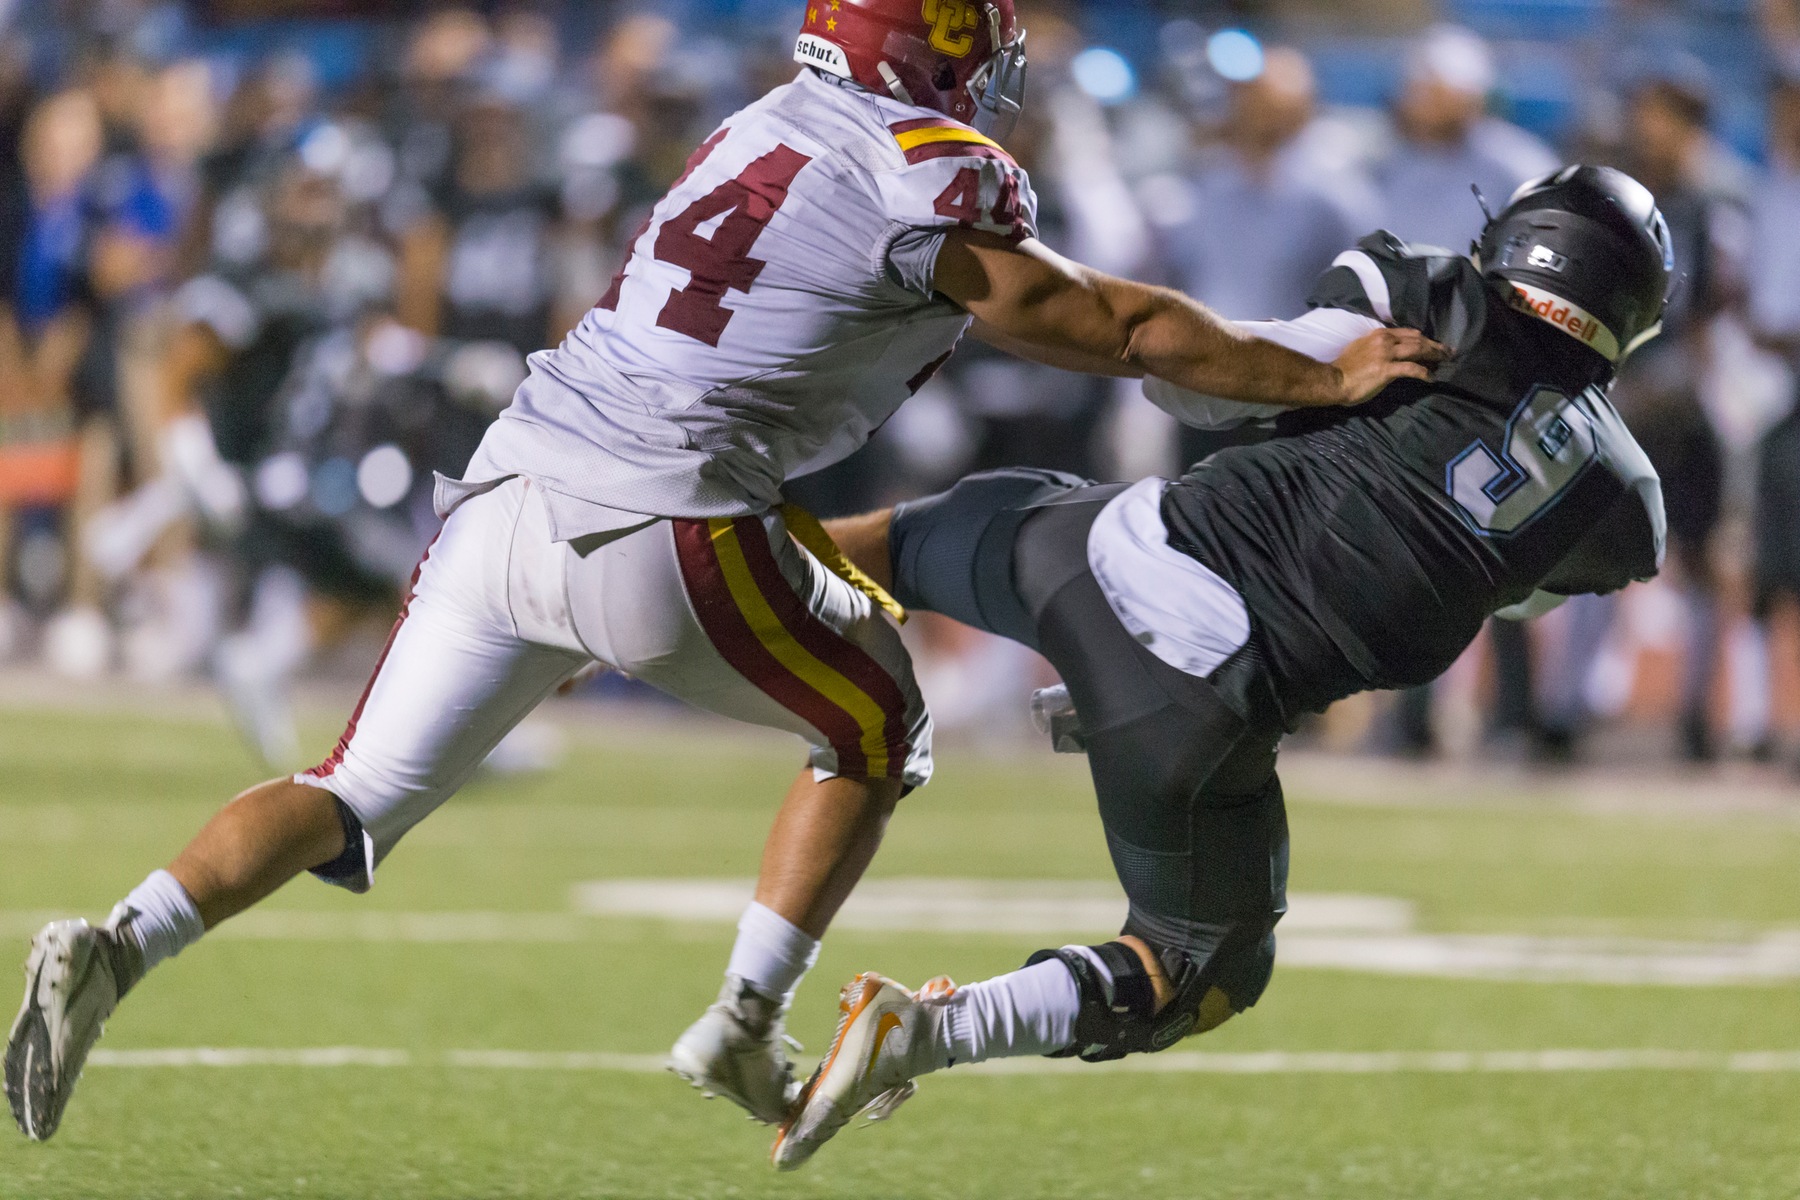 Glendale strikes early and often in 40-23 win over L.A. Valley for second straight victory